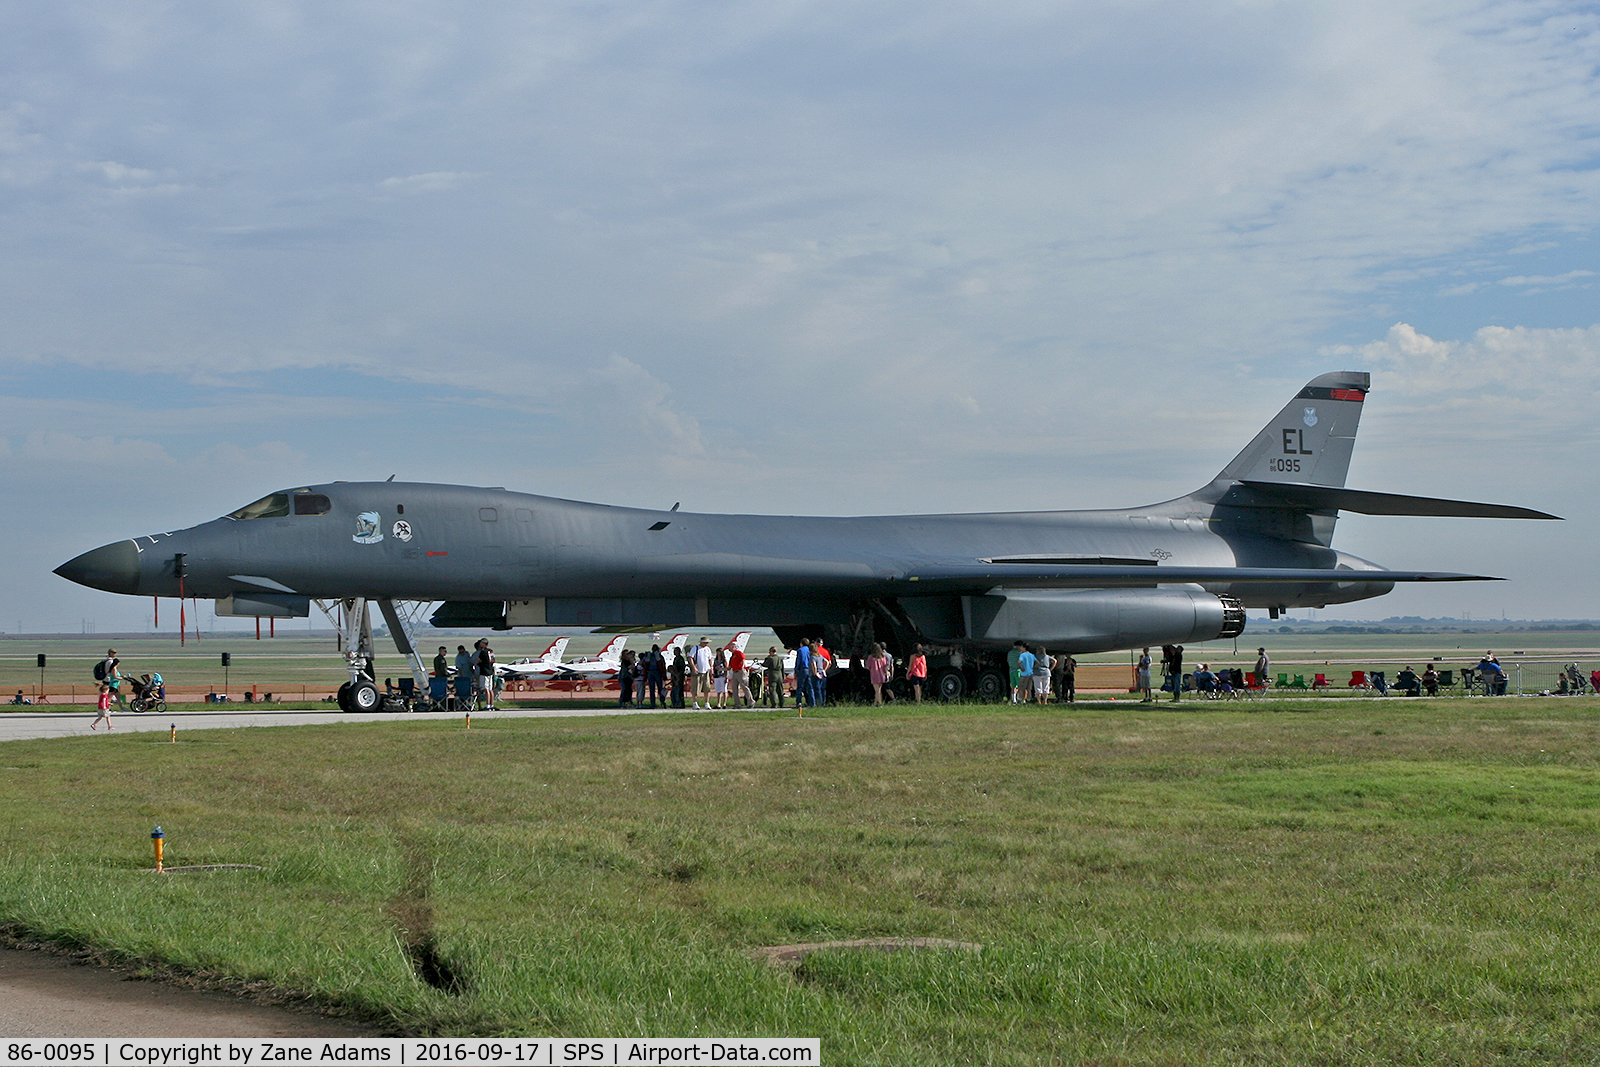 86-0095, 1986 Rockwell B-1B Lancer C/N 55, At the 2017 Sheppard AFB Airshow